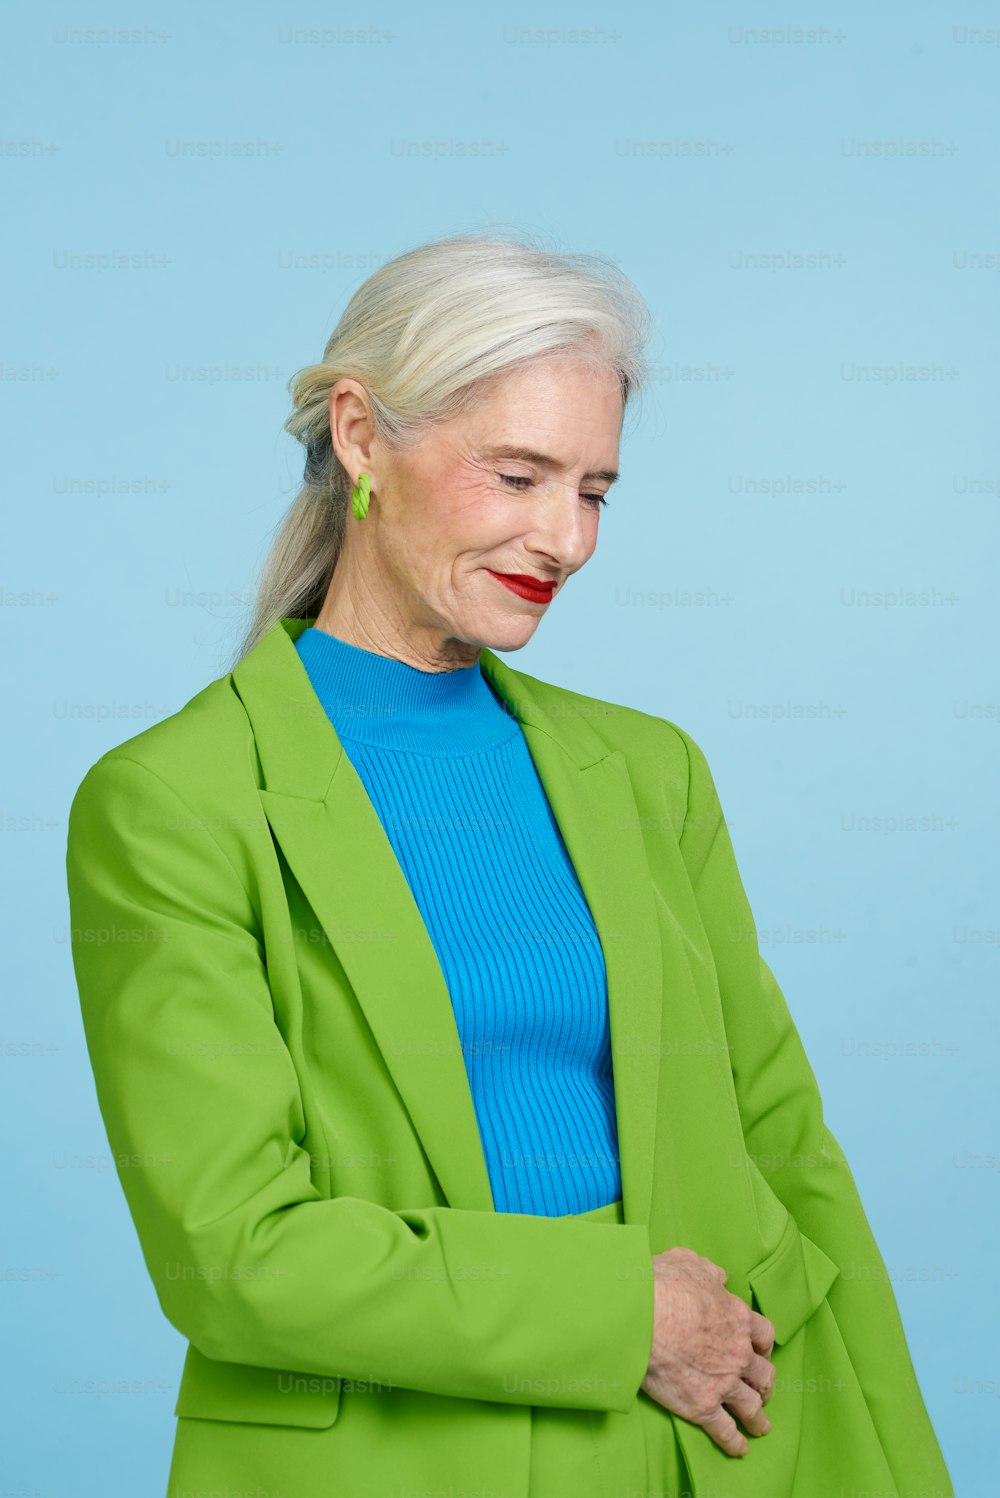 a woman in a green jacket and blue top